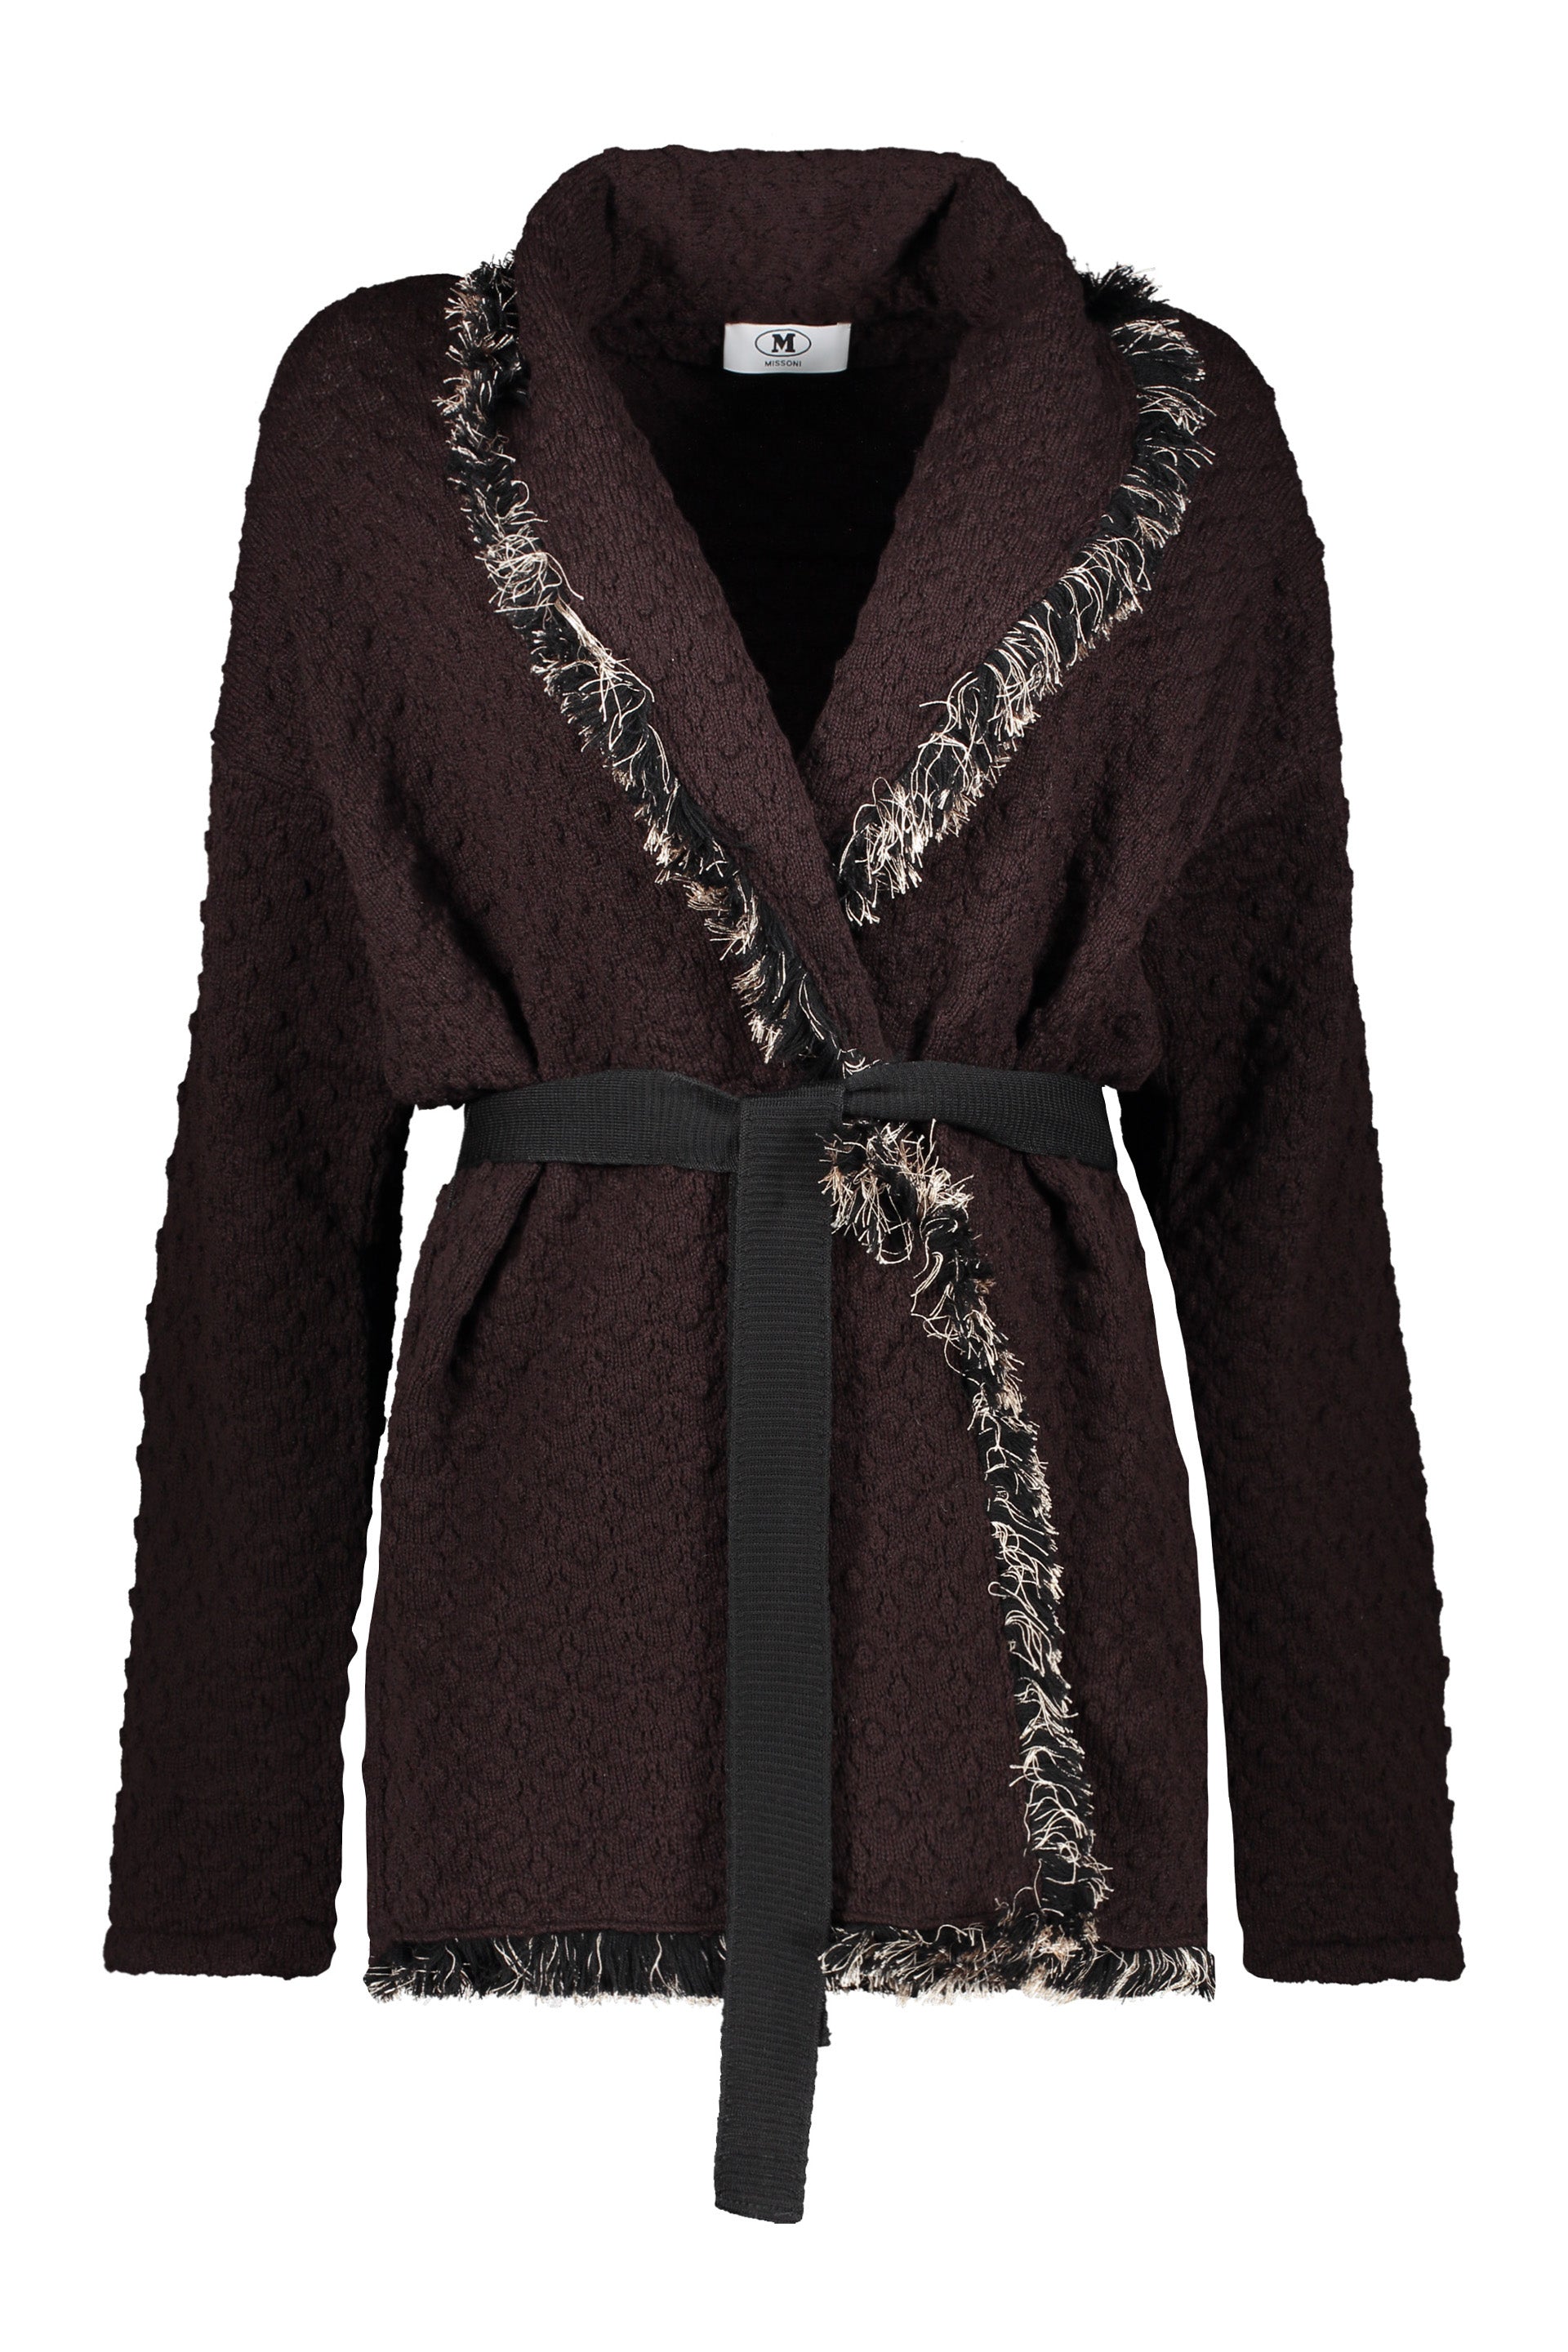 Missoni-OUTLET-SALE-Wool-cardigan-Strick-L-ARCHIVE-COLLECTION.jpg